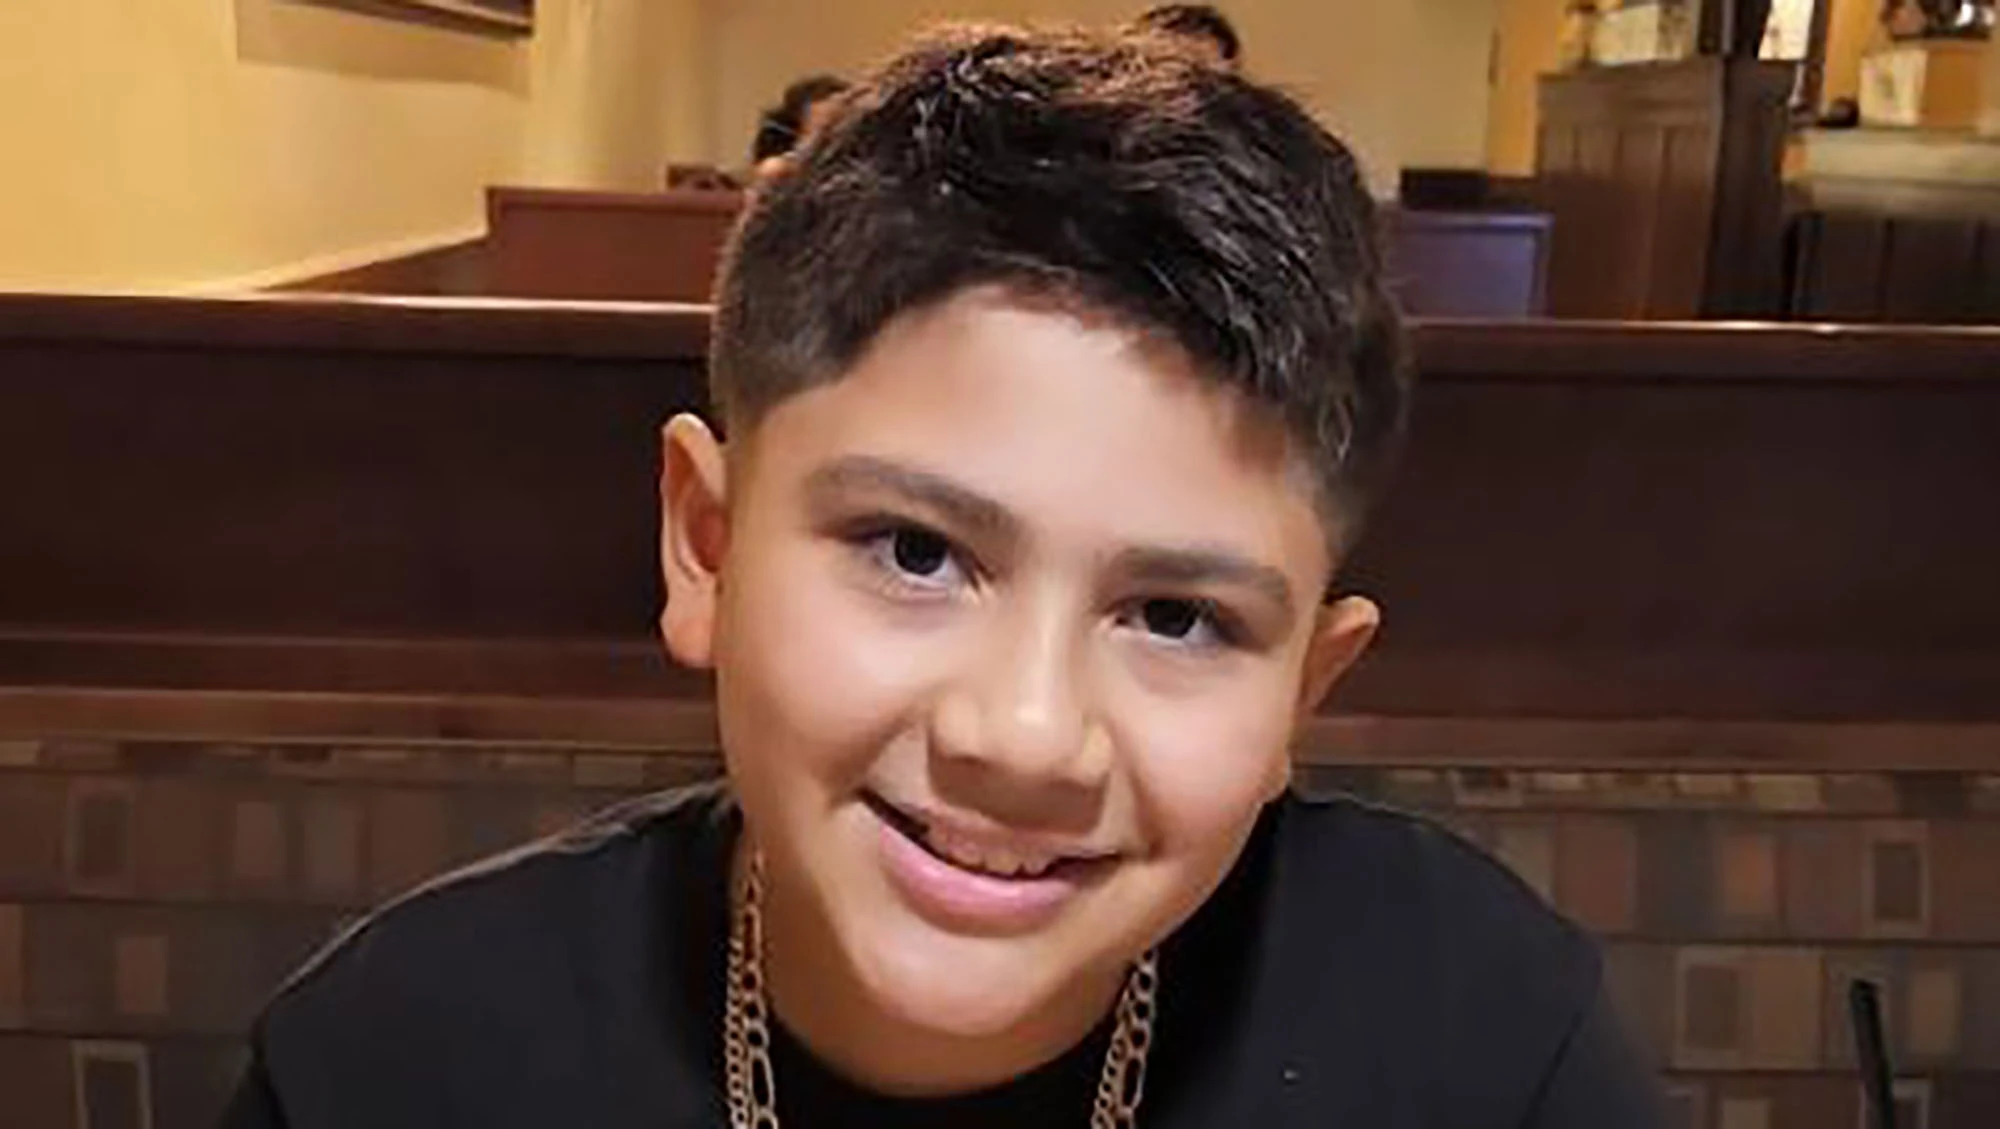 Ulysses Campos obituary: What happened to 9-year-old boy in Franklin Park 